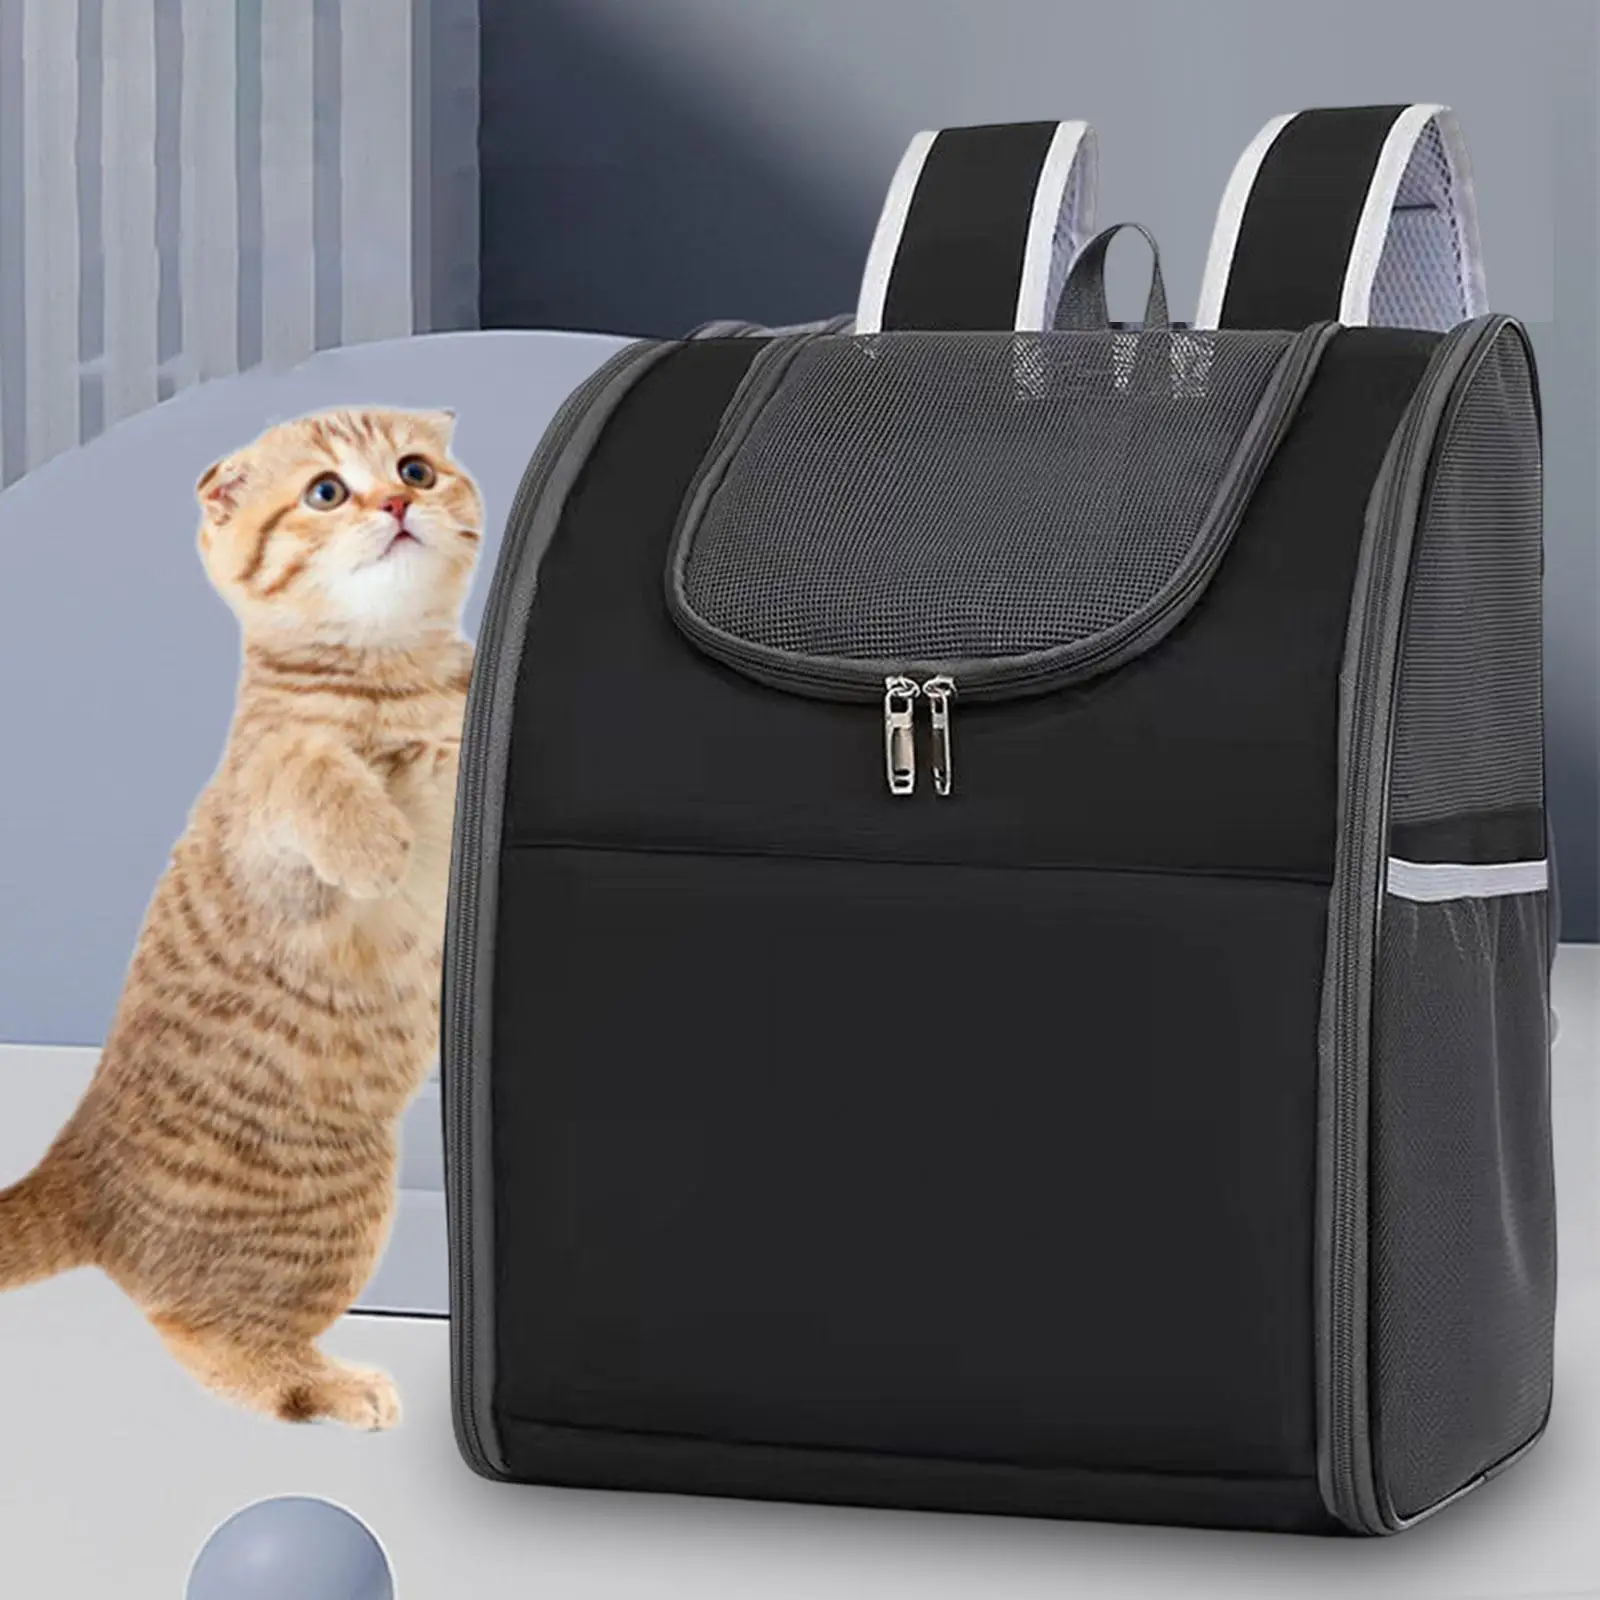 Ventilate Travel Bag for Small Dogs Cats Cat Carrier Backpacks Breathable Pet Carrier Backpack for Rabbits Kittens Puppy Camping